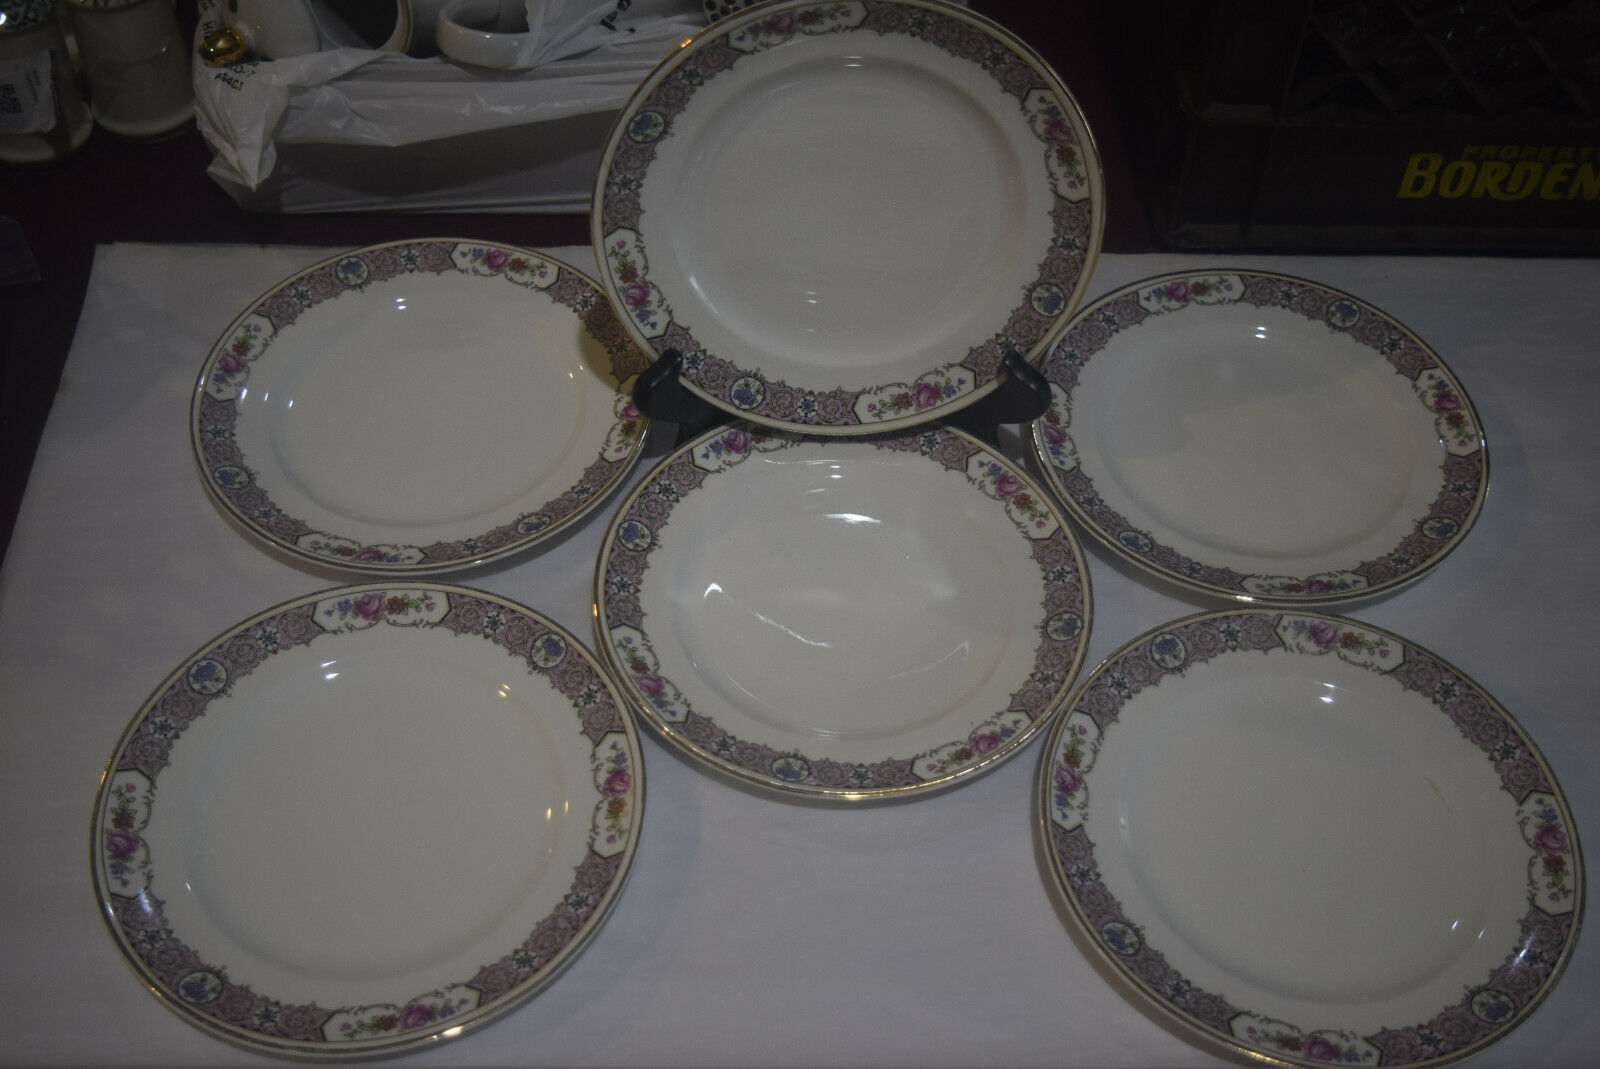 Six Bread And Butter Plates - W. S. George Derwood - Gold Trimmed